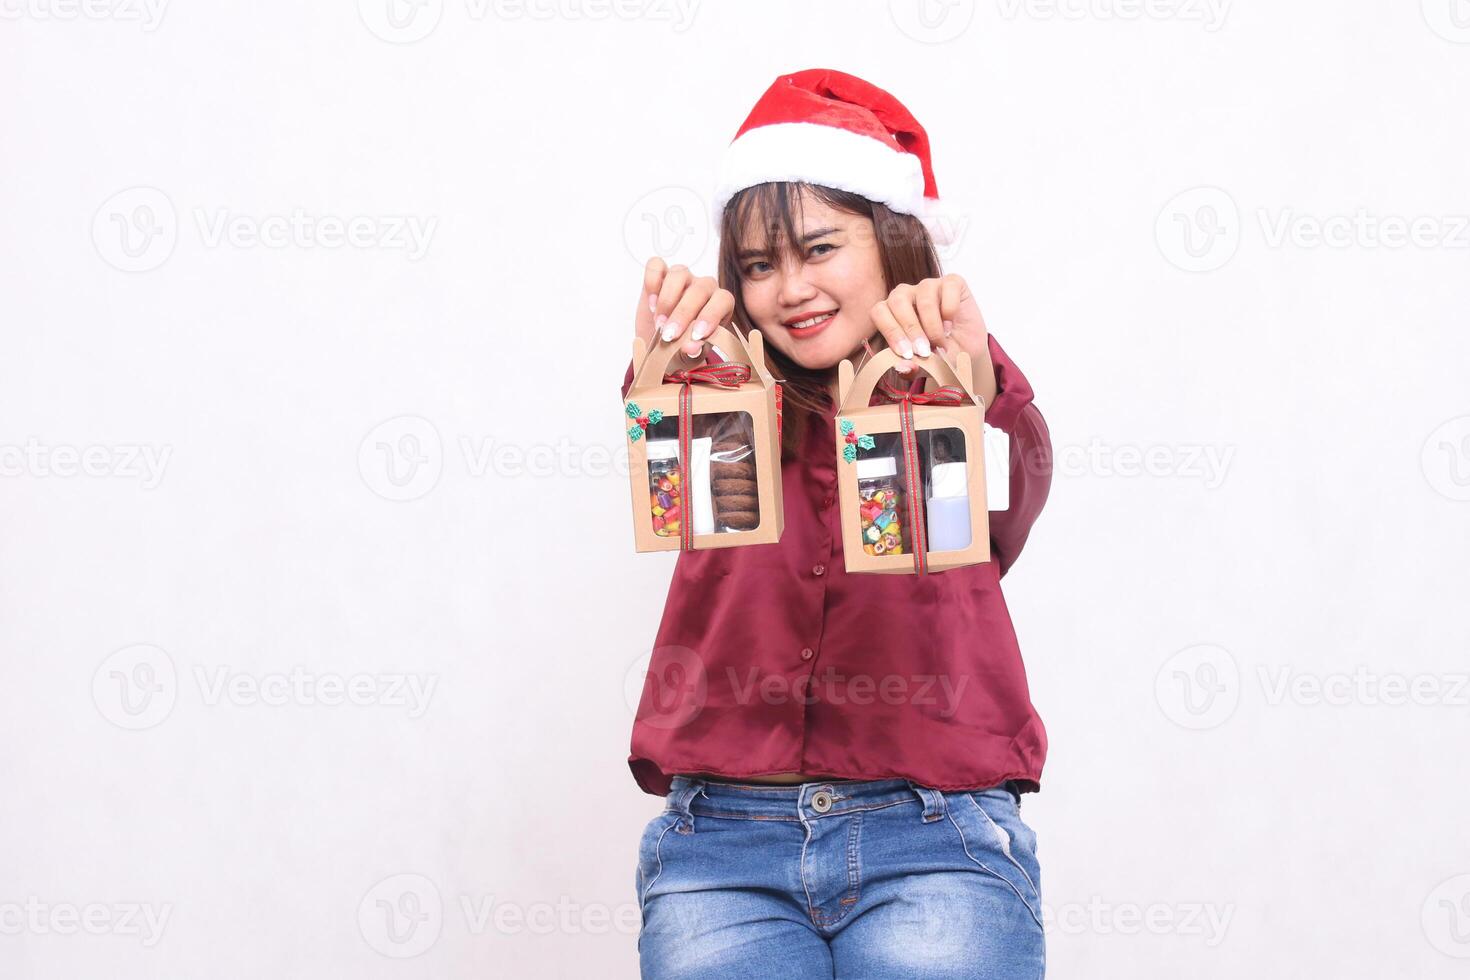 Beautiful young Southeast Asian woman smiling hands forward carrying 2 boxes of hamper gifts at Christmas wearing Santa Claus hat modern red shirt outfit white background for promotion and advertising photo